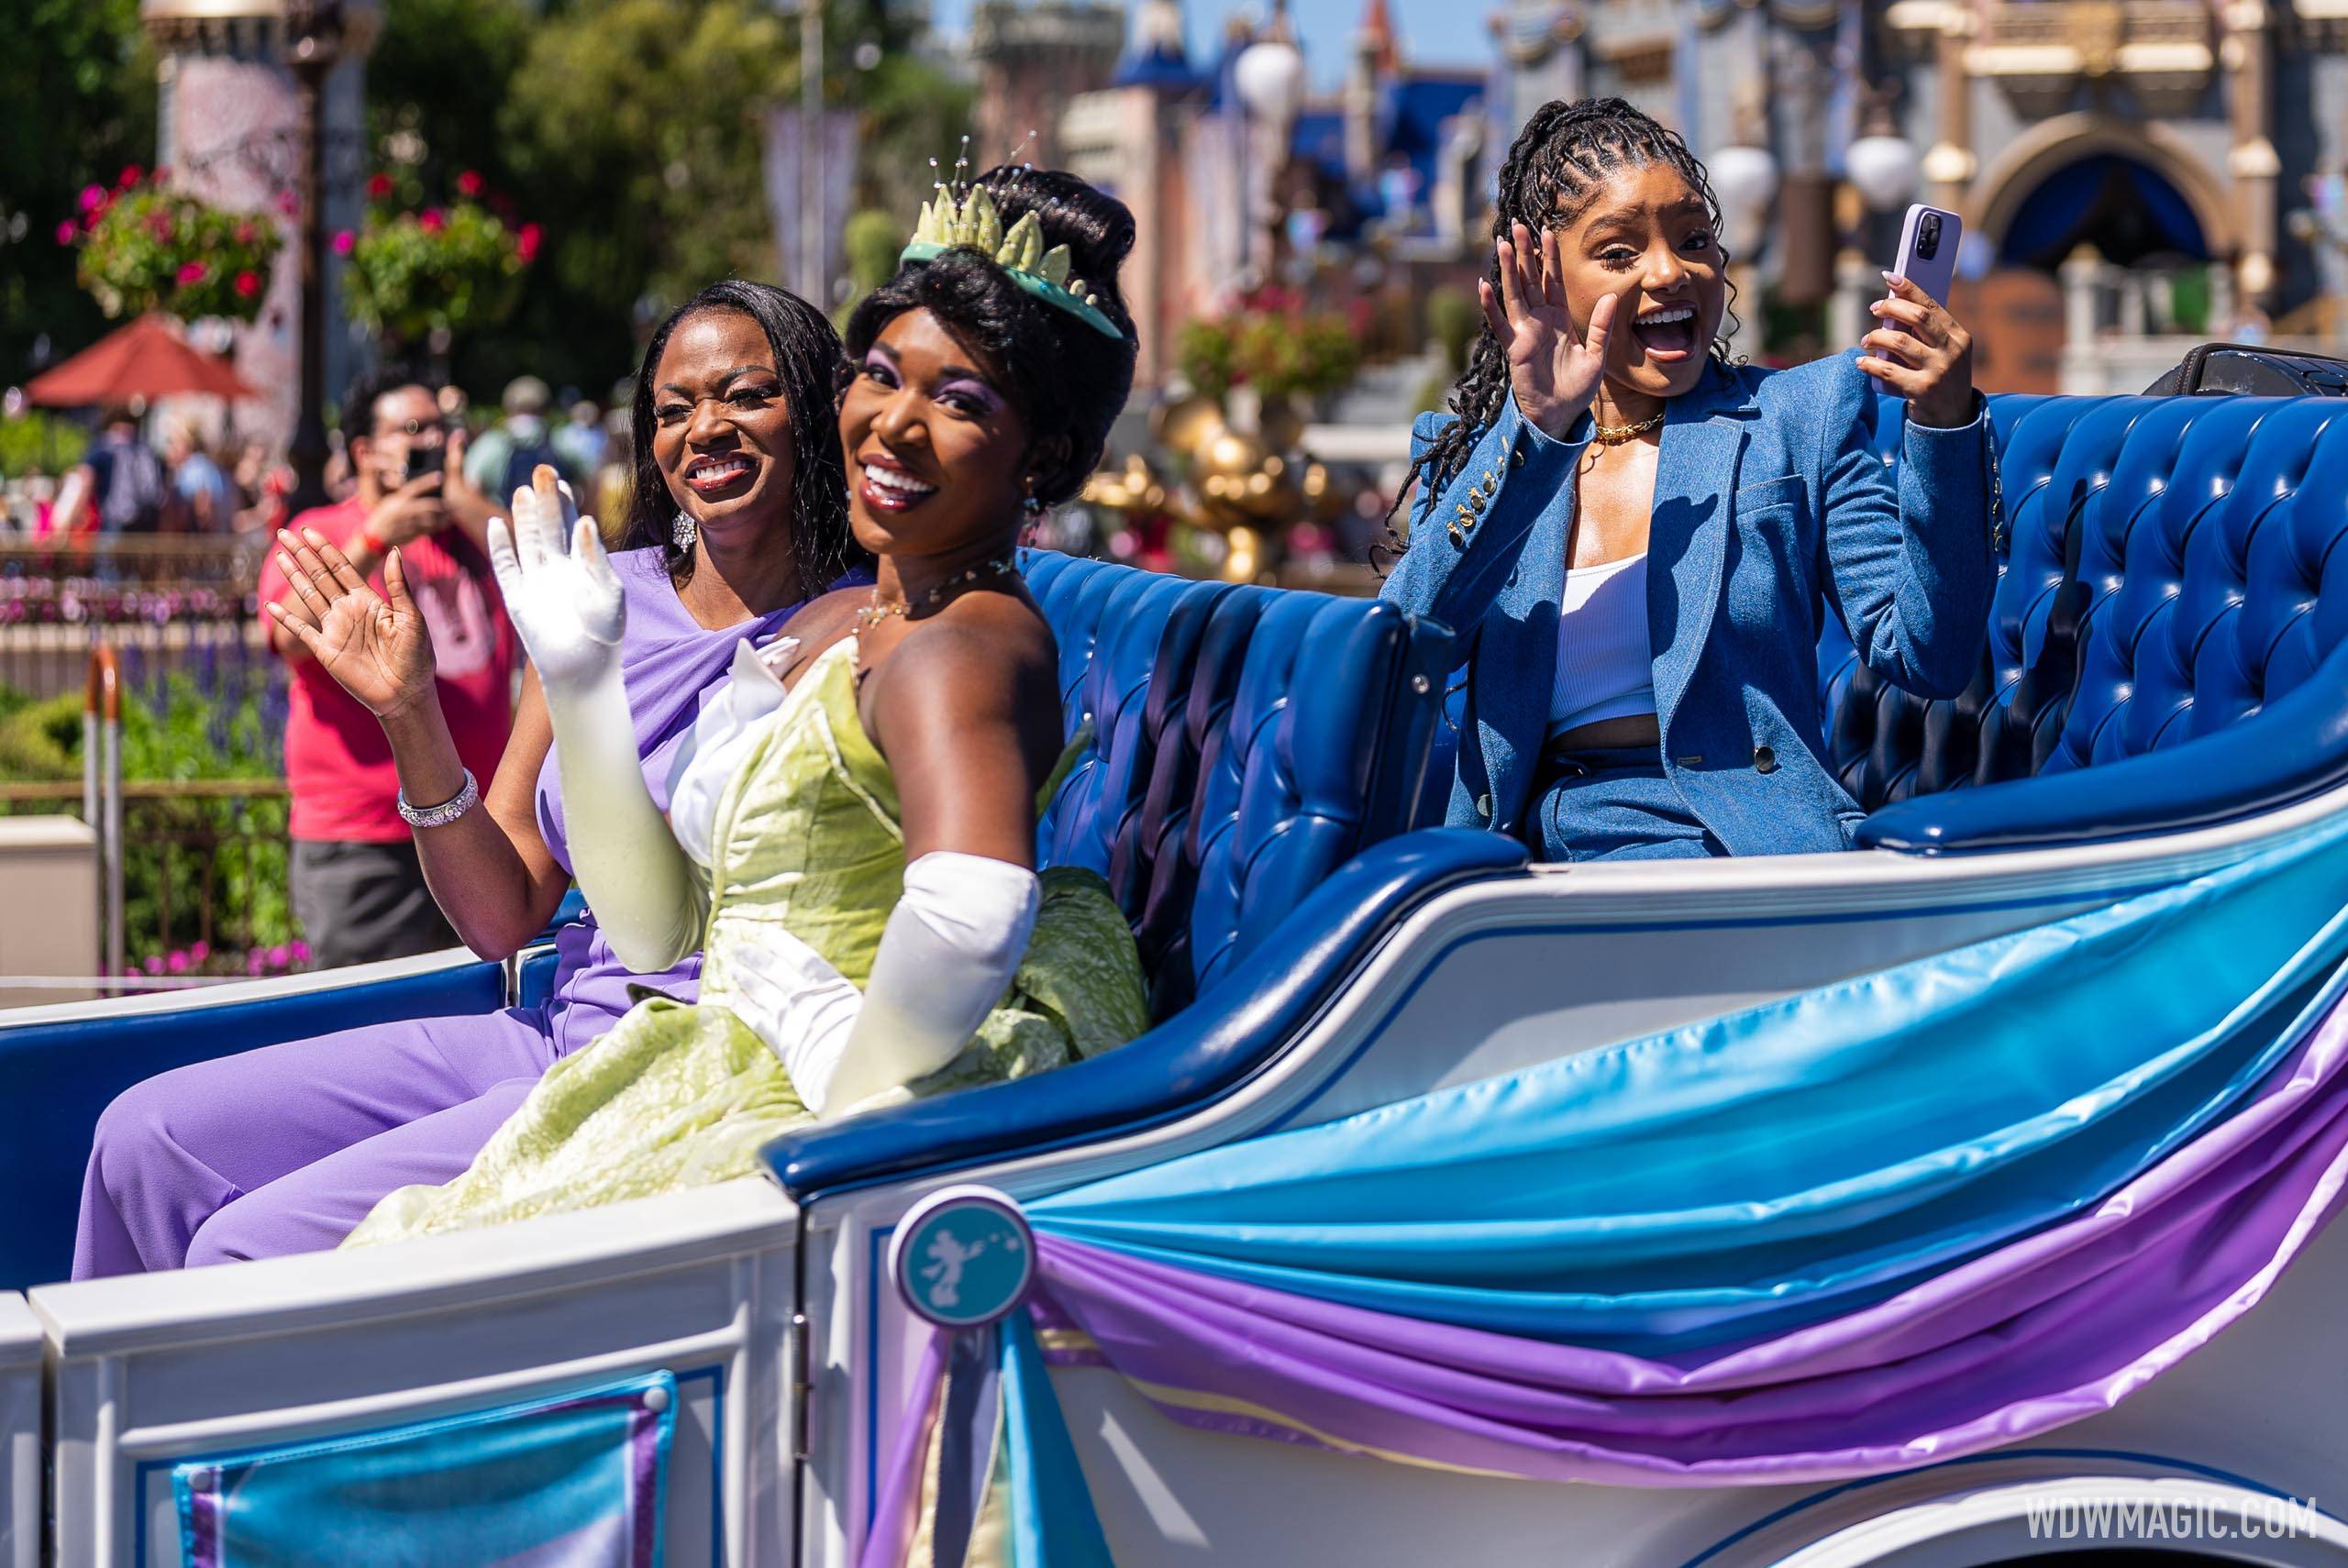 The Little Mermaid star Halle Bailey joins the Disney Dreamers Academy in a special cavalcade at Magic Kingdom